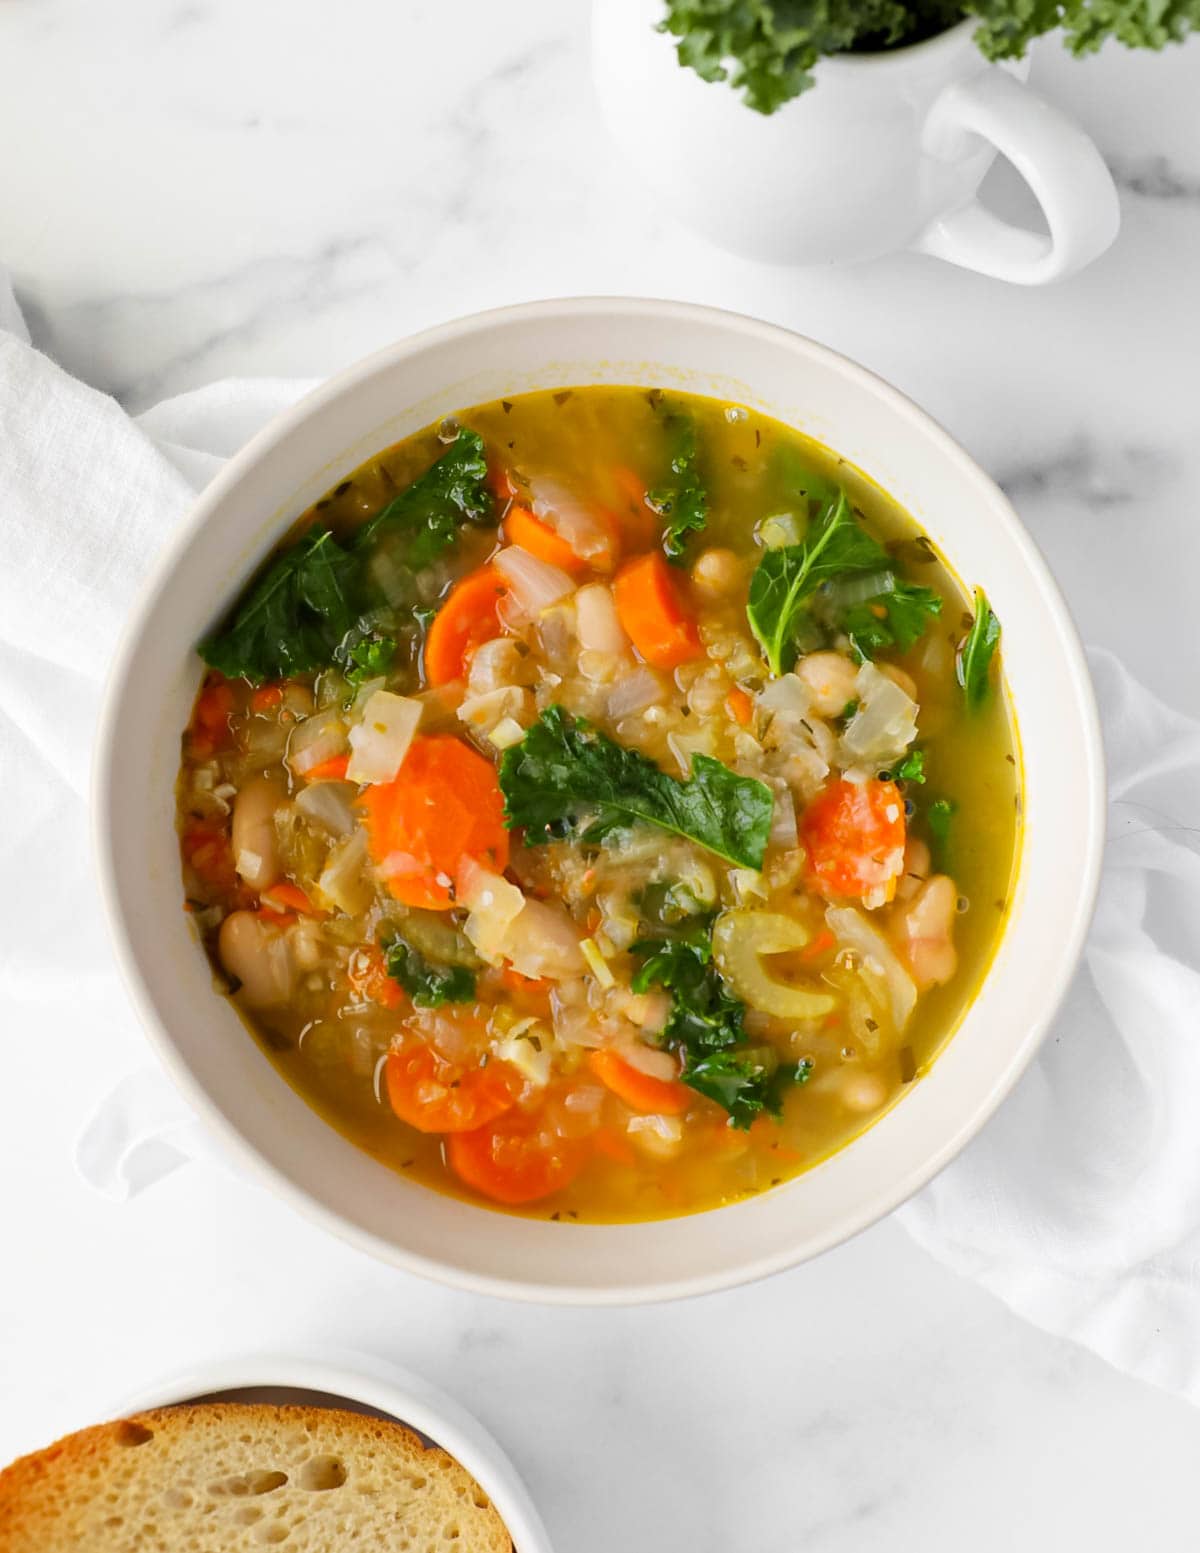 A white bowl filled with soup containing carrots, celery, beans, and kale. rrots, kale,